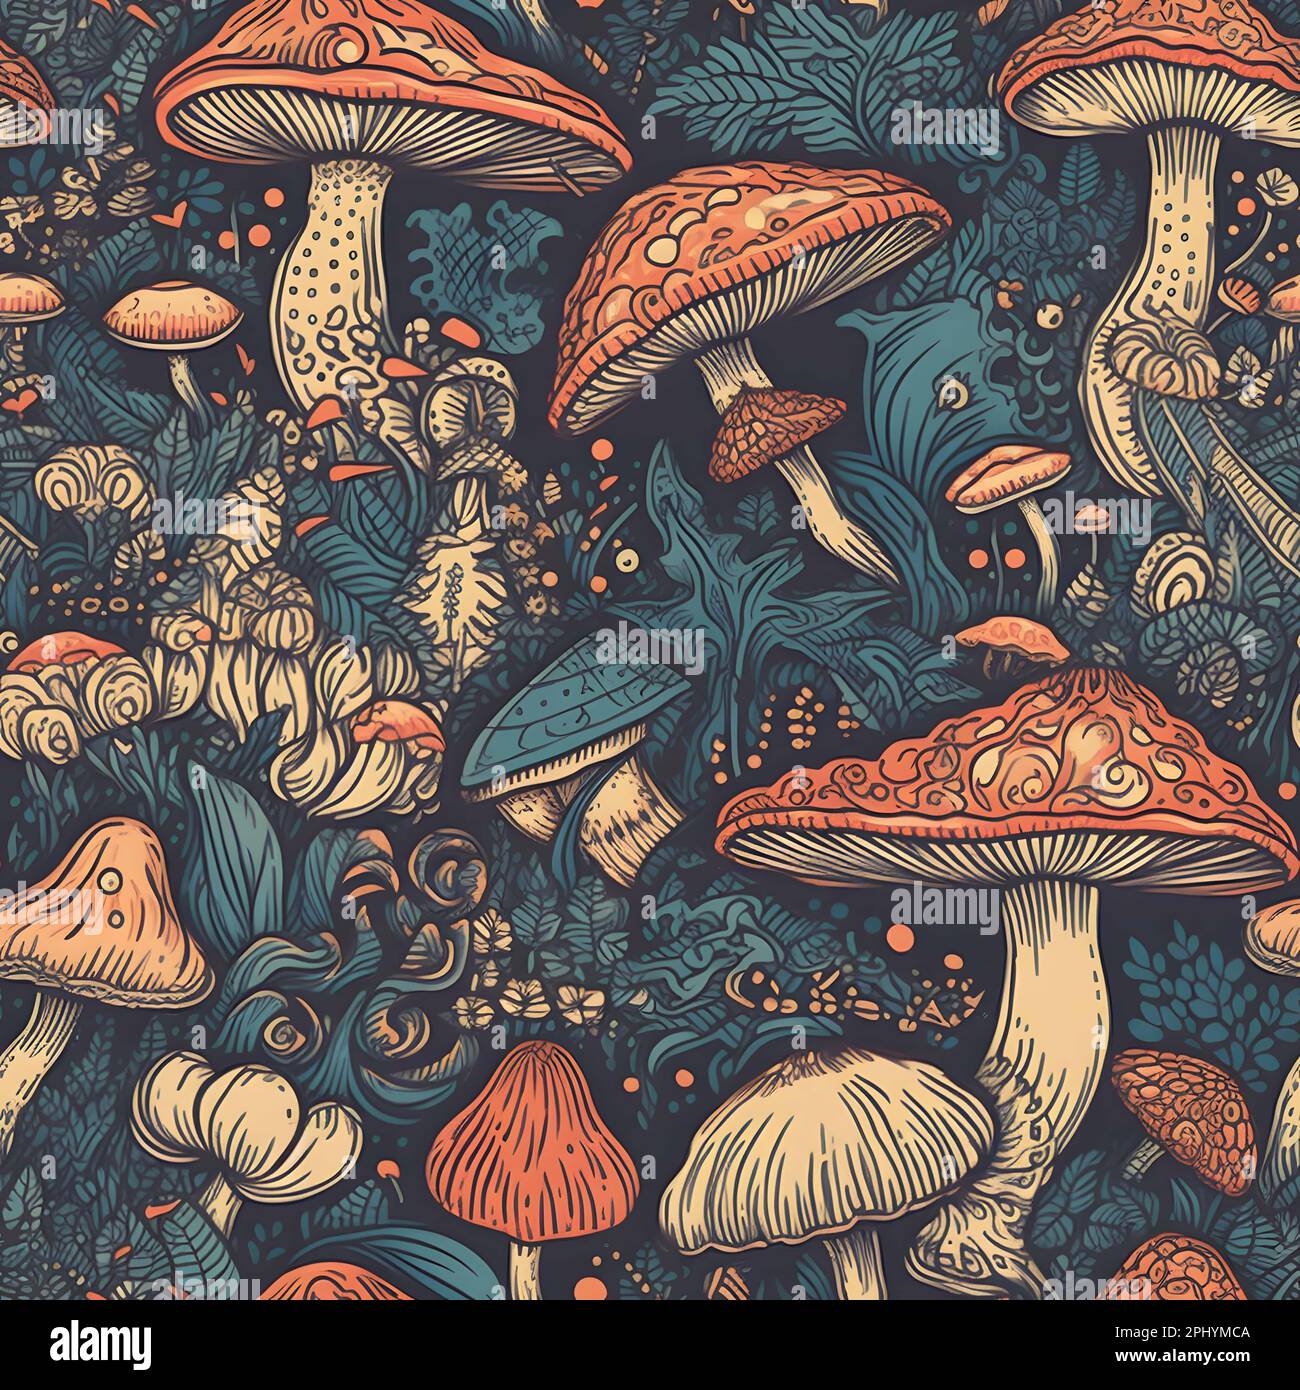 Seamless pattern with mushrooms. Vector illustration in vintage style. Stock Photo